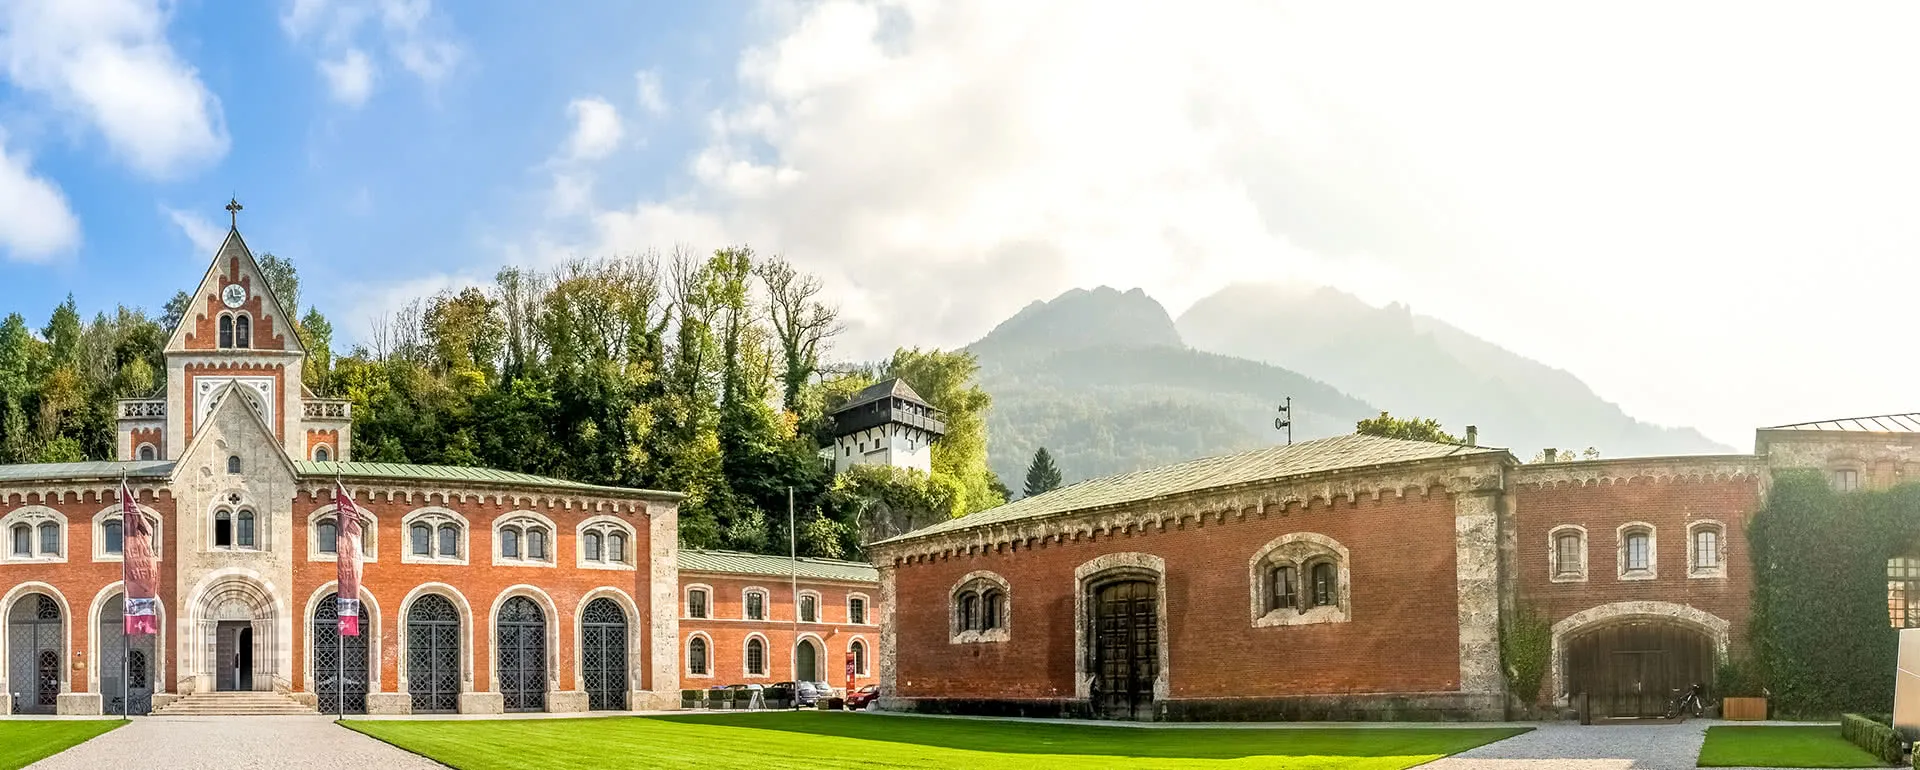 Bad Reichenhall - the destination with youth hostels